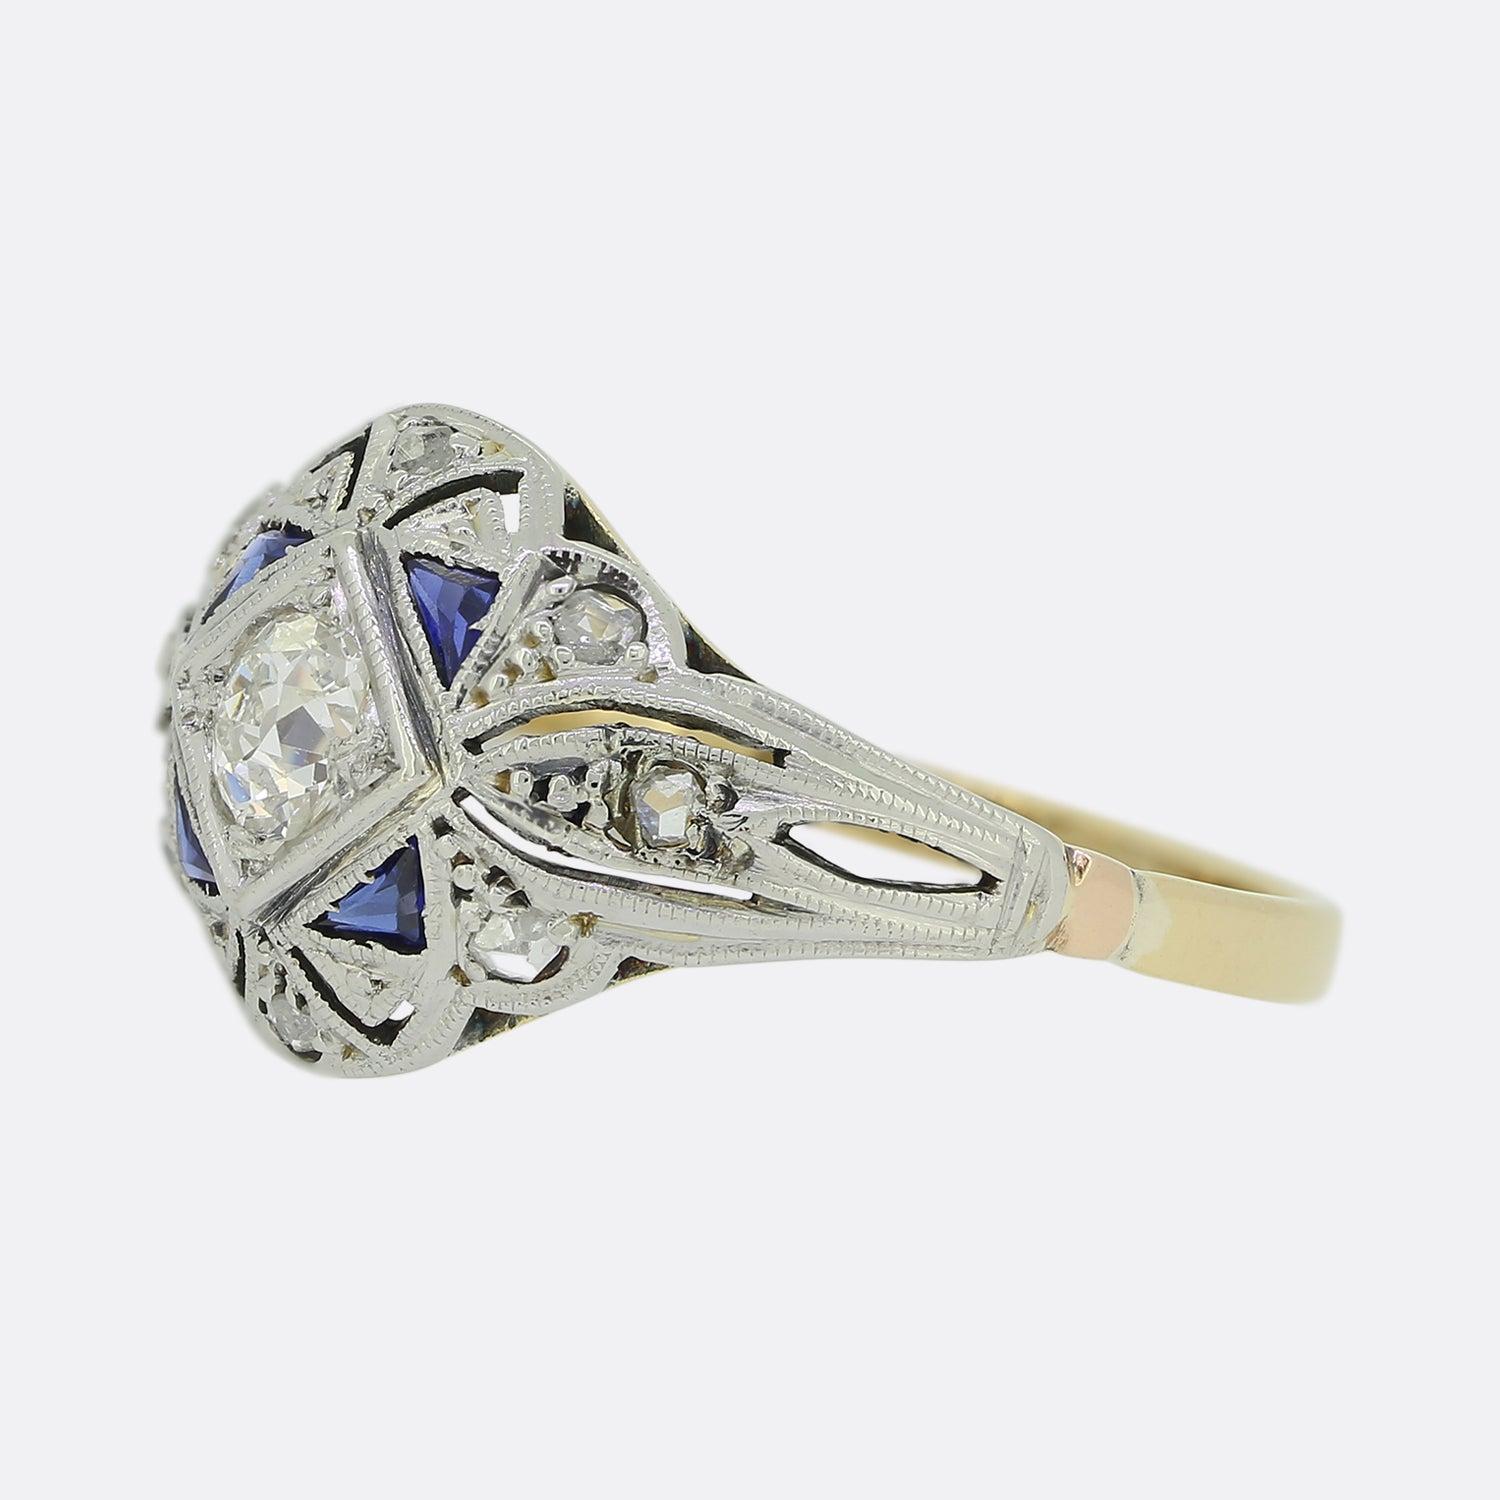 This is a delightful Art Deco sapphire and diamond ring. Crafted from 18ct gold, this piece showcases the archetypal decadence of the style including handcrafted pierced open work, the fine milgrain bordering and the sleek geometric settings.